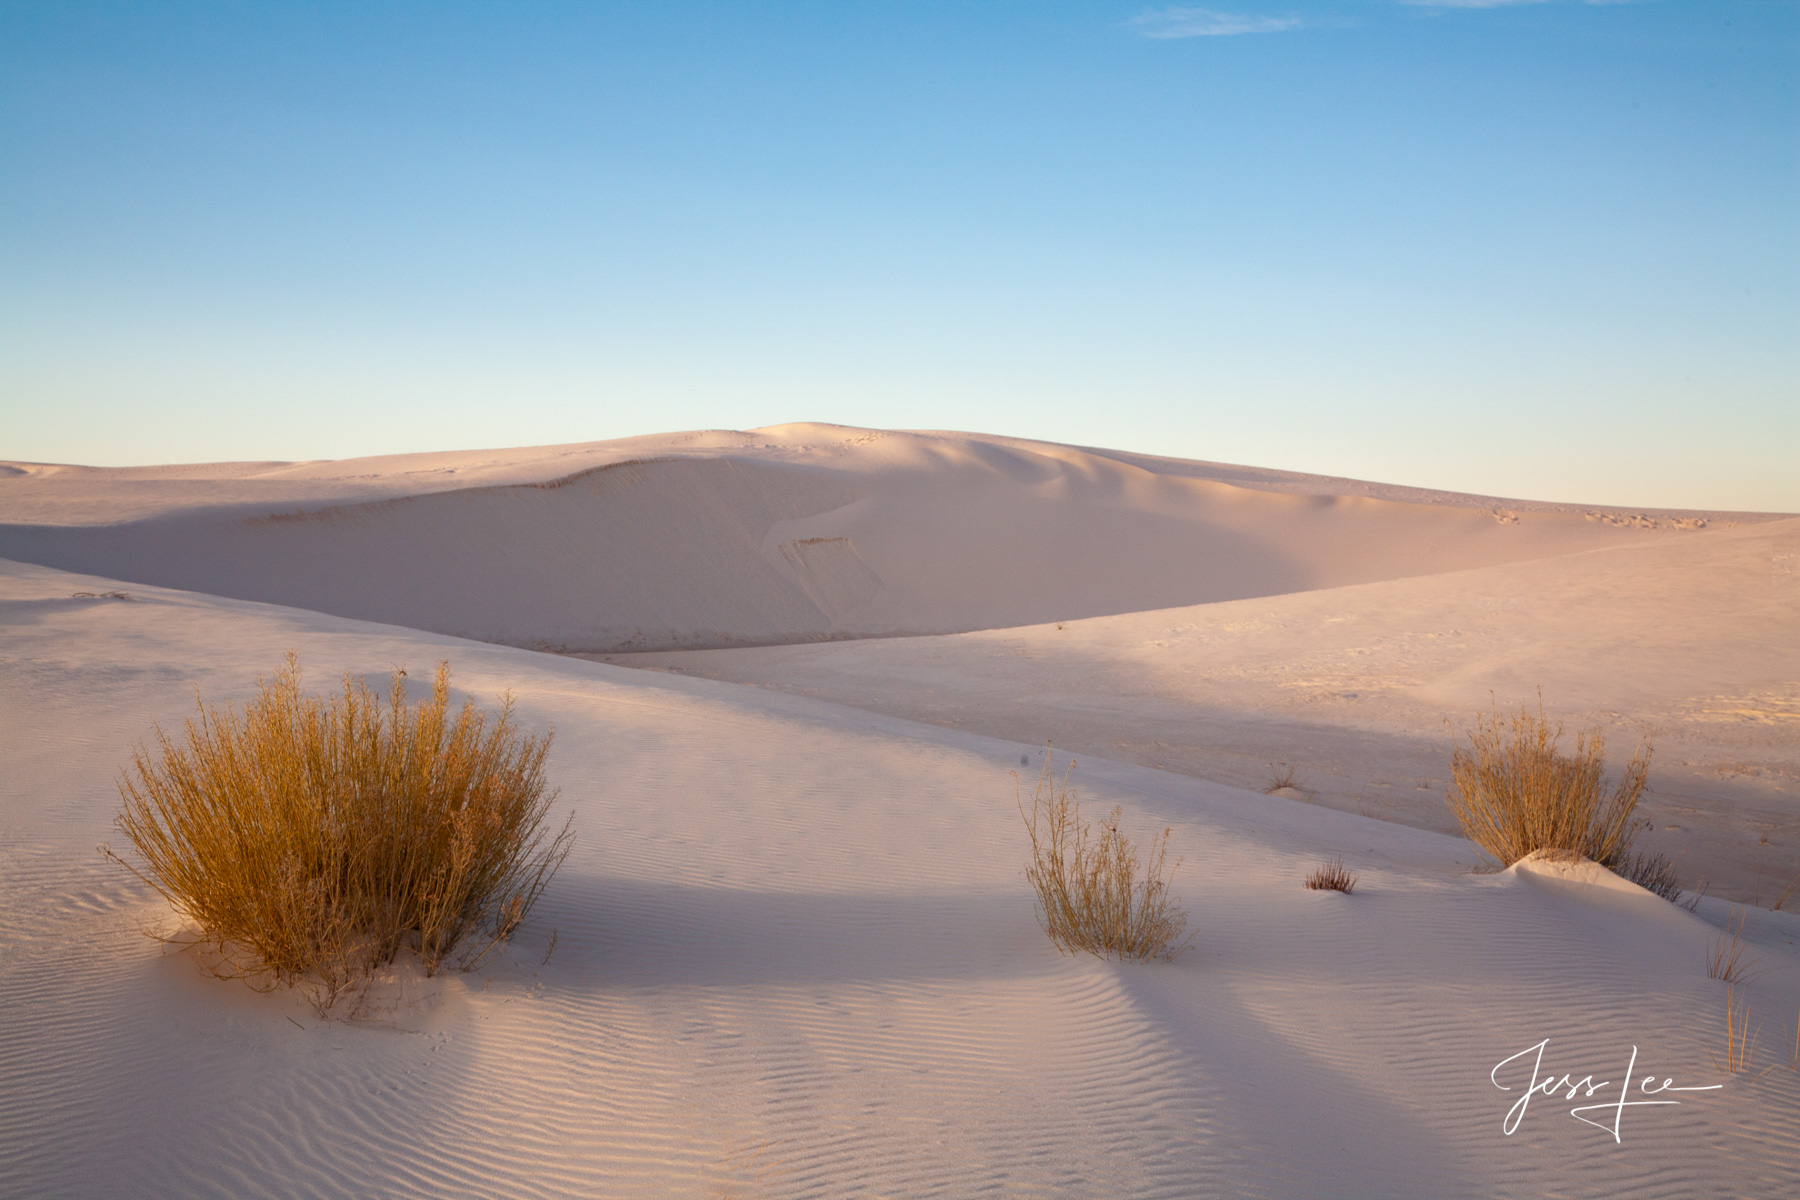 White Sands Fine Art Photo Limited Edition of 50 Exclusive high-resolution Museum Quality Fine Art Prints of Desert and Badlands...